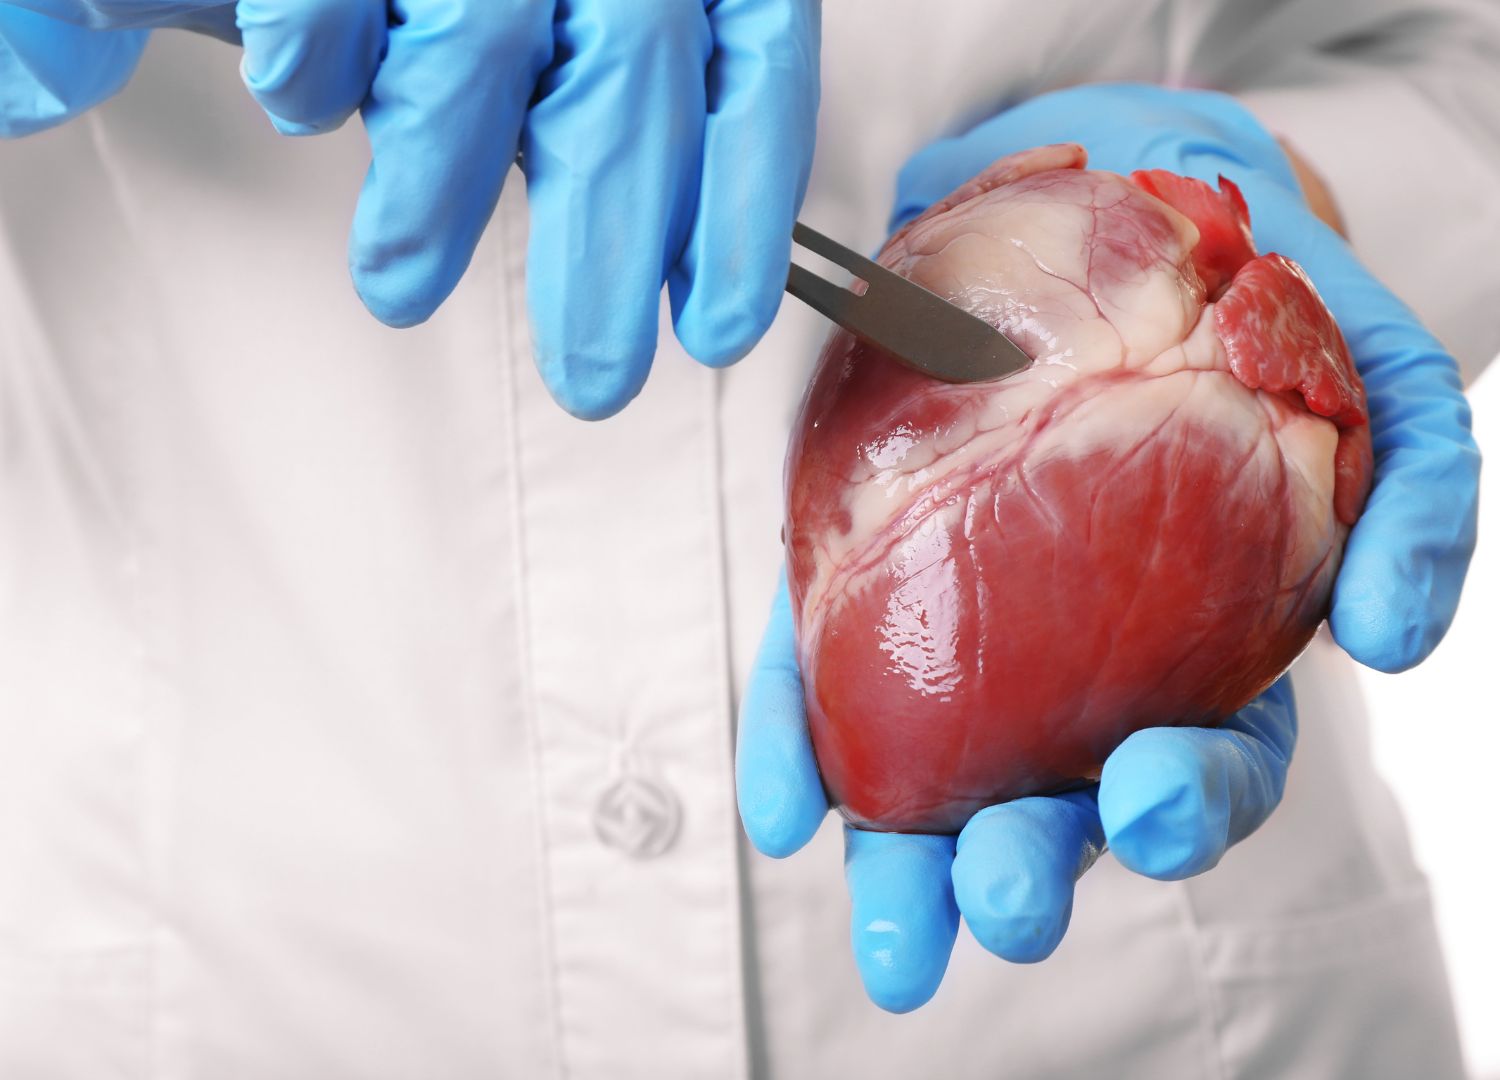 Heart Transplant: Wetin you suppose sabi about am